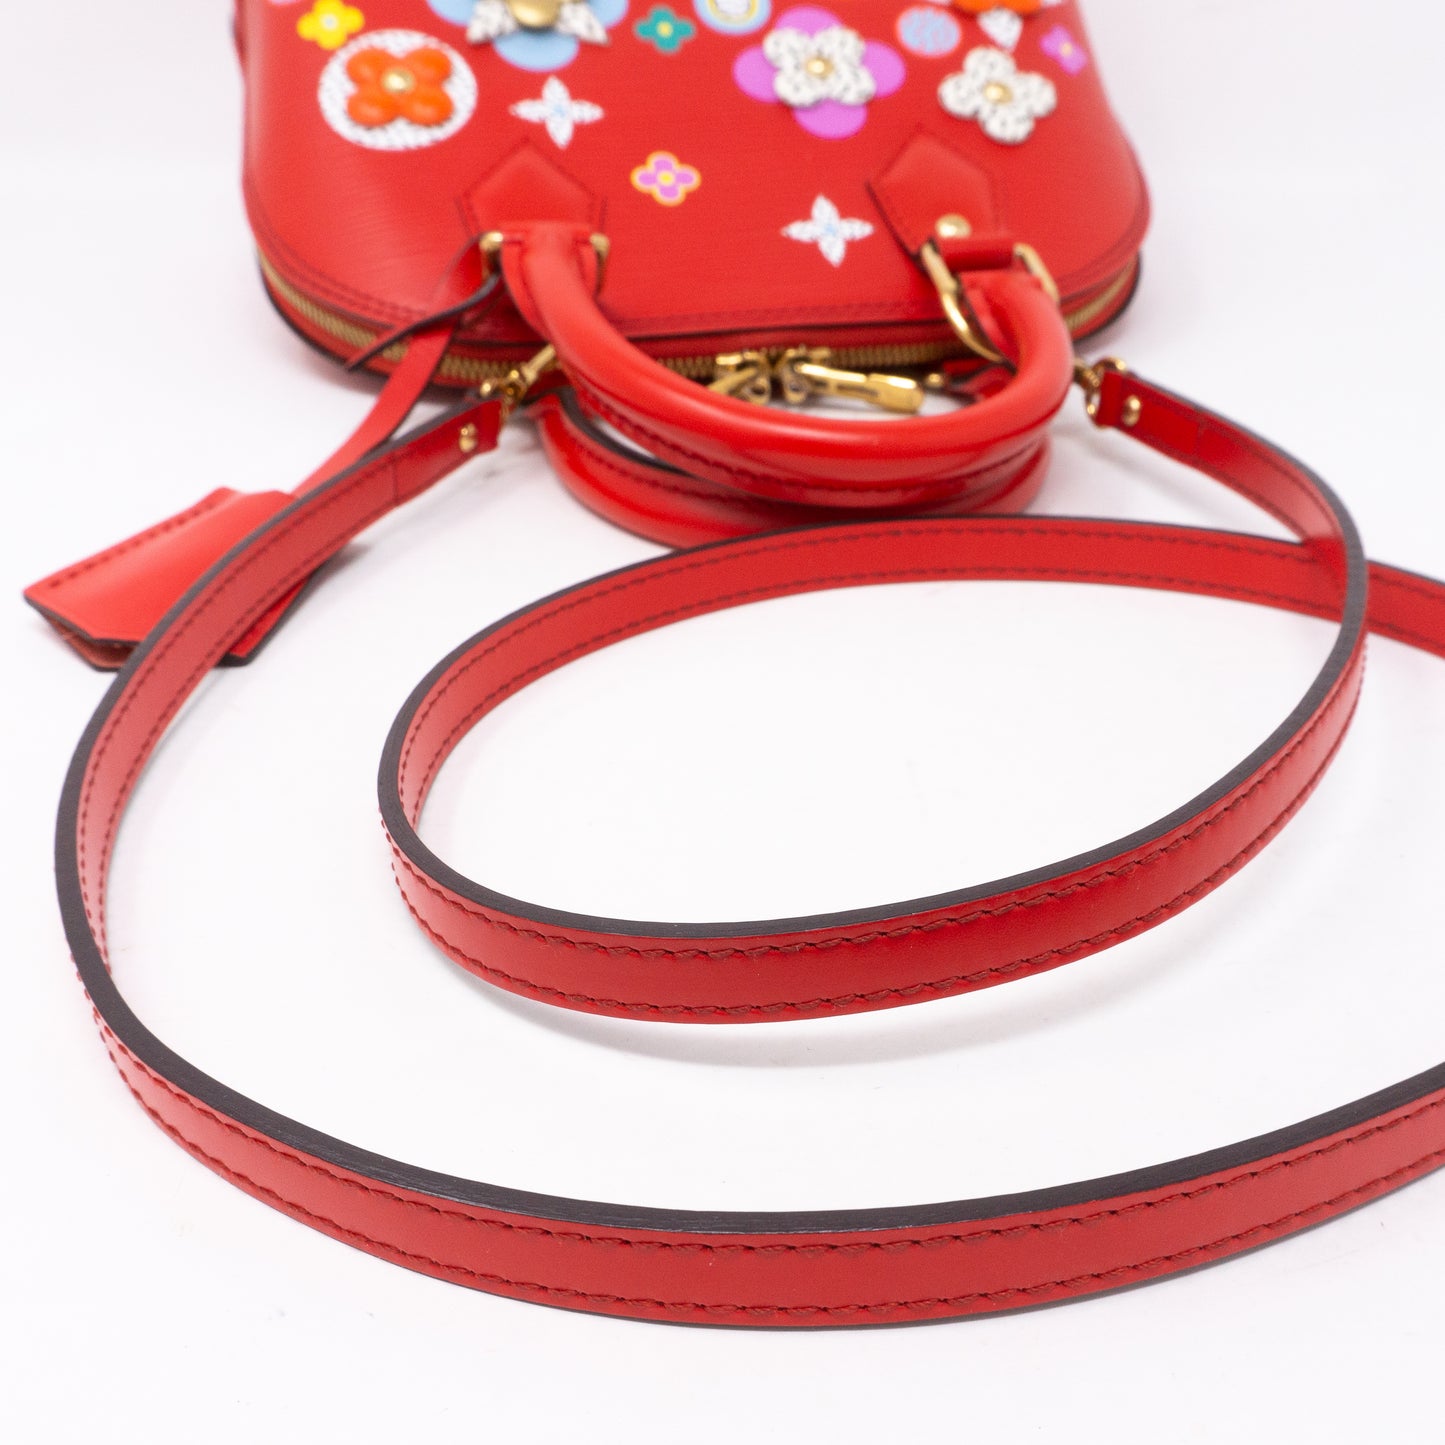 Alma BB Edition Blooming Flowers bag in red epi leather Louis